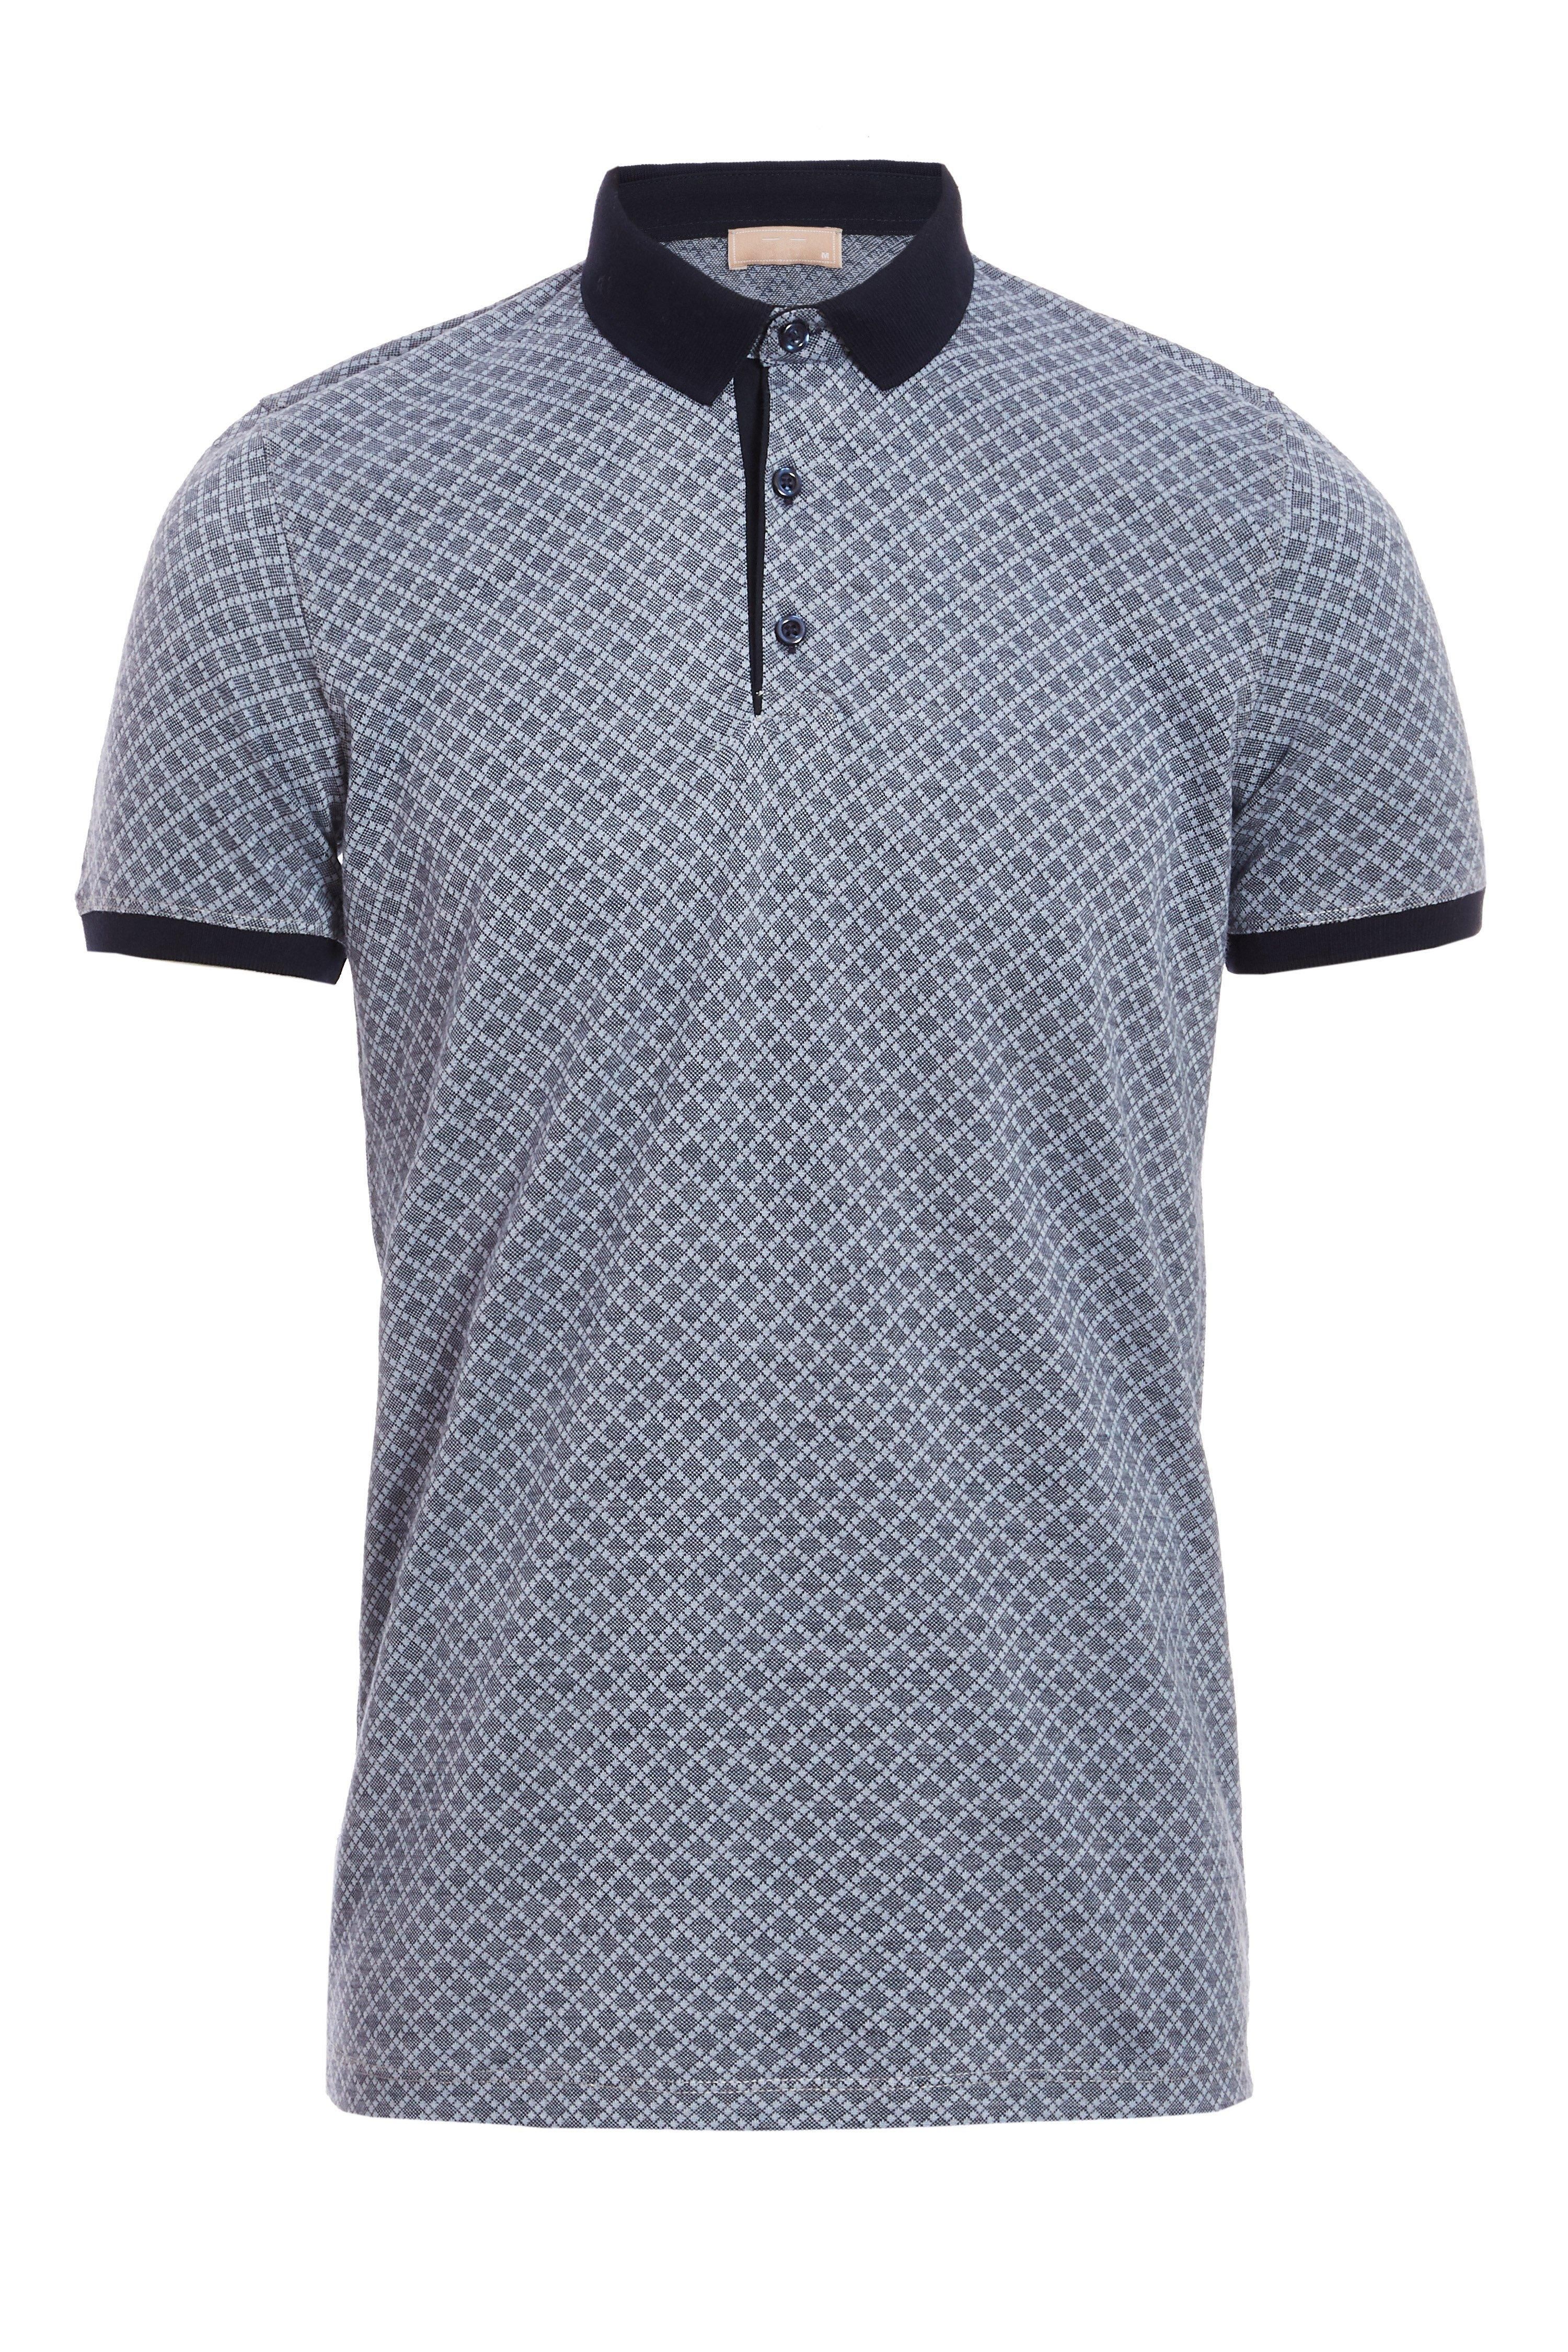 Printed Polo  	Diamond Pattern  	Short Sleeves  	2 Button Fastening  	Contrast Collar and Piping